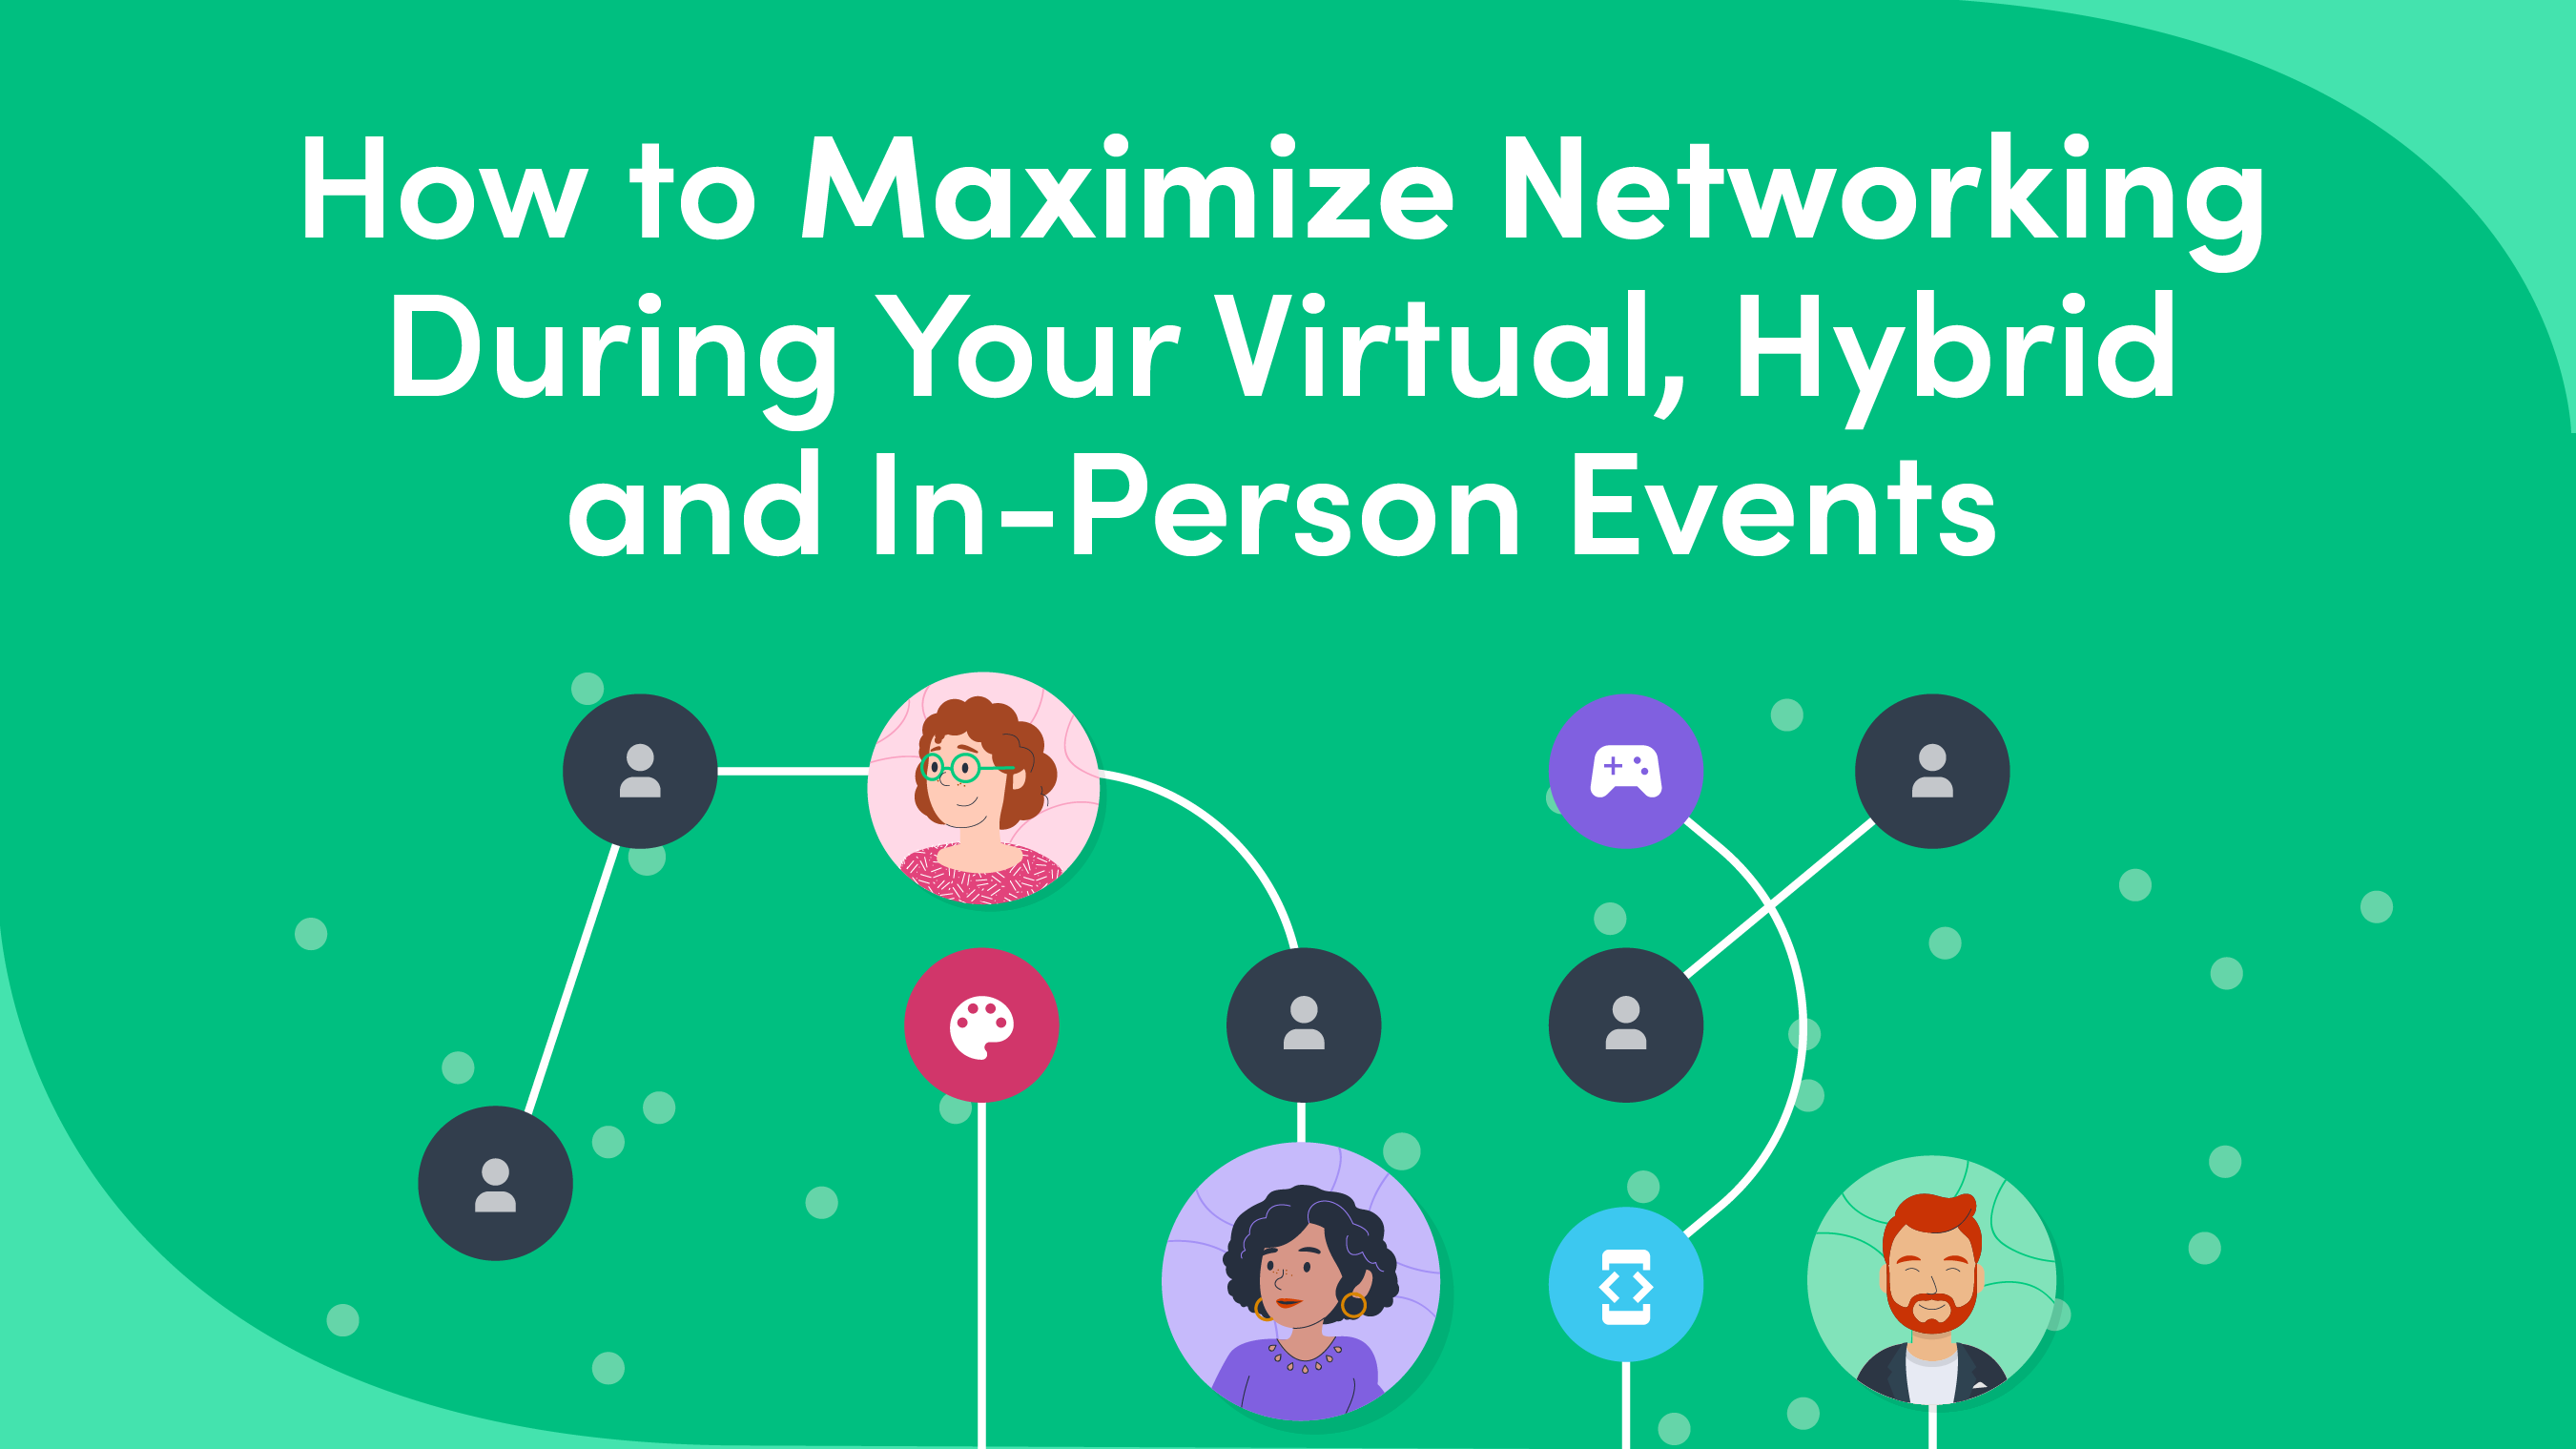 How to Maximize Networking During Virtual, Hybrid & In-Person Events